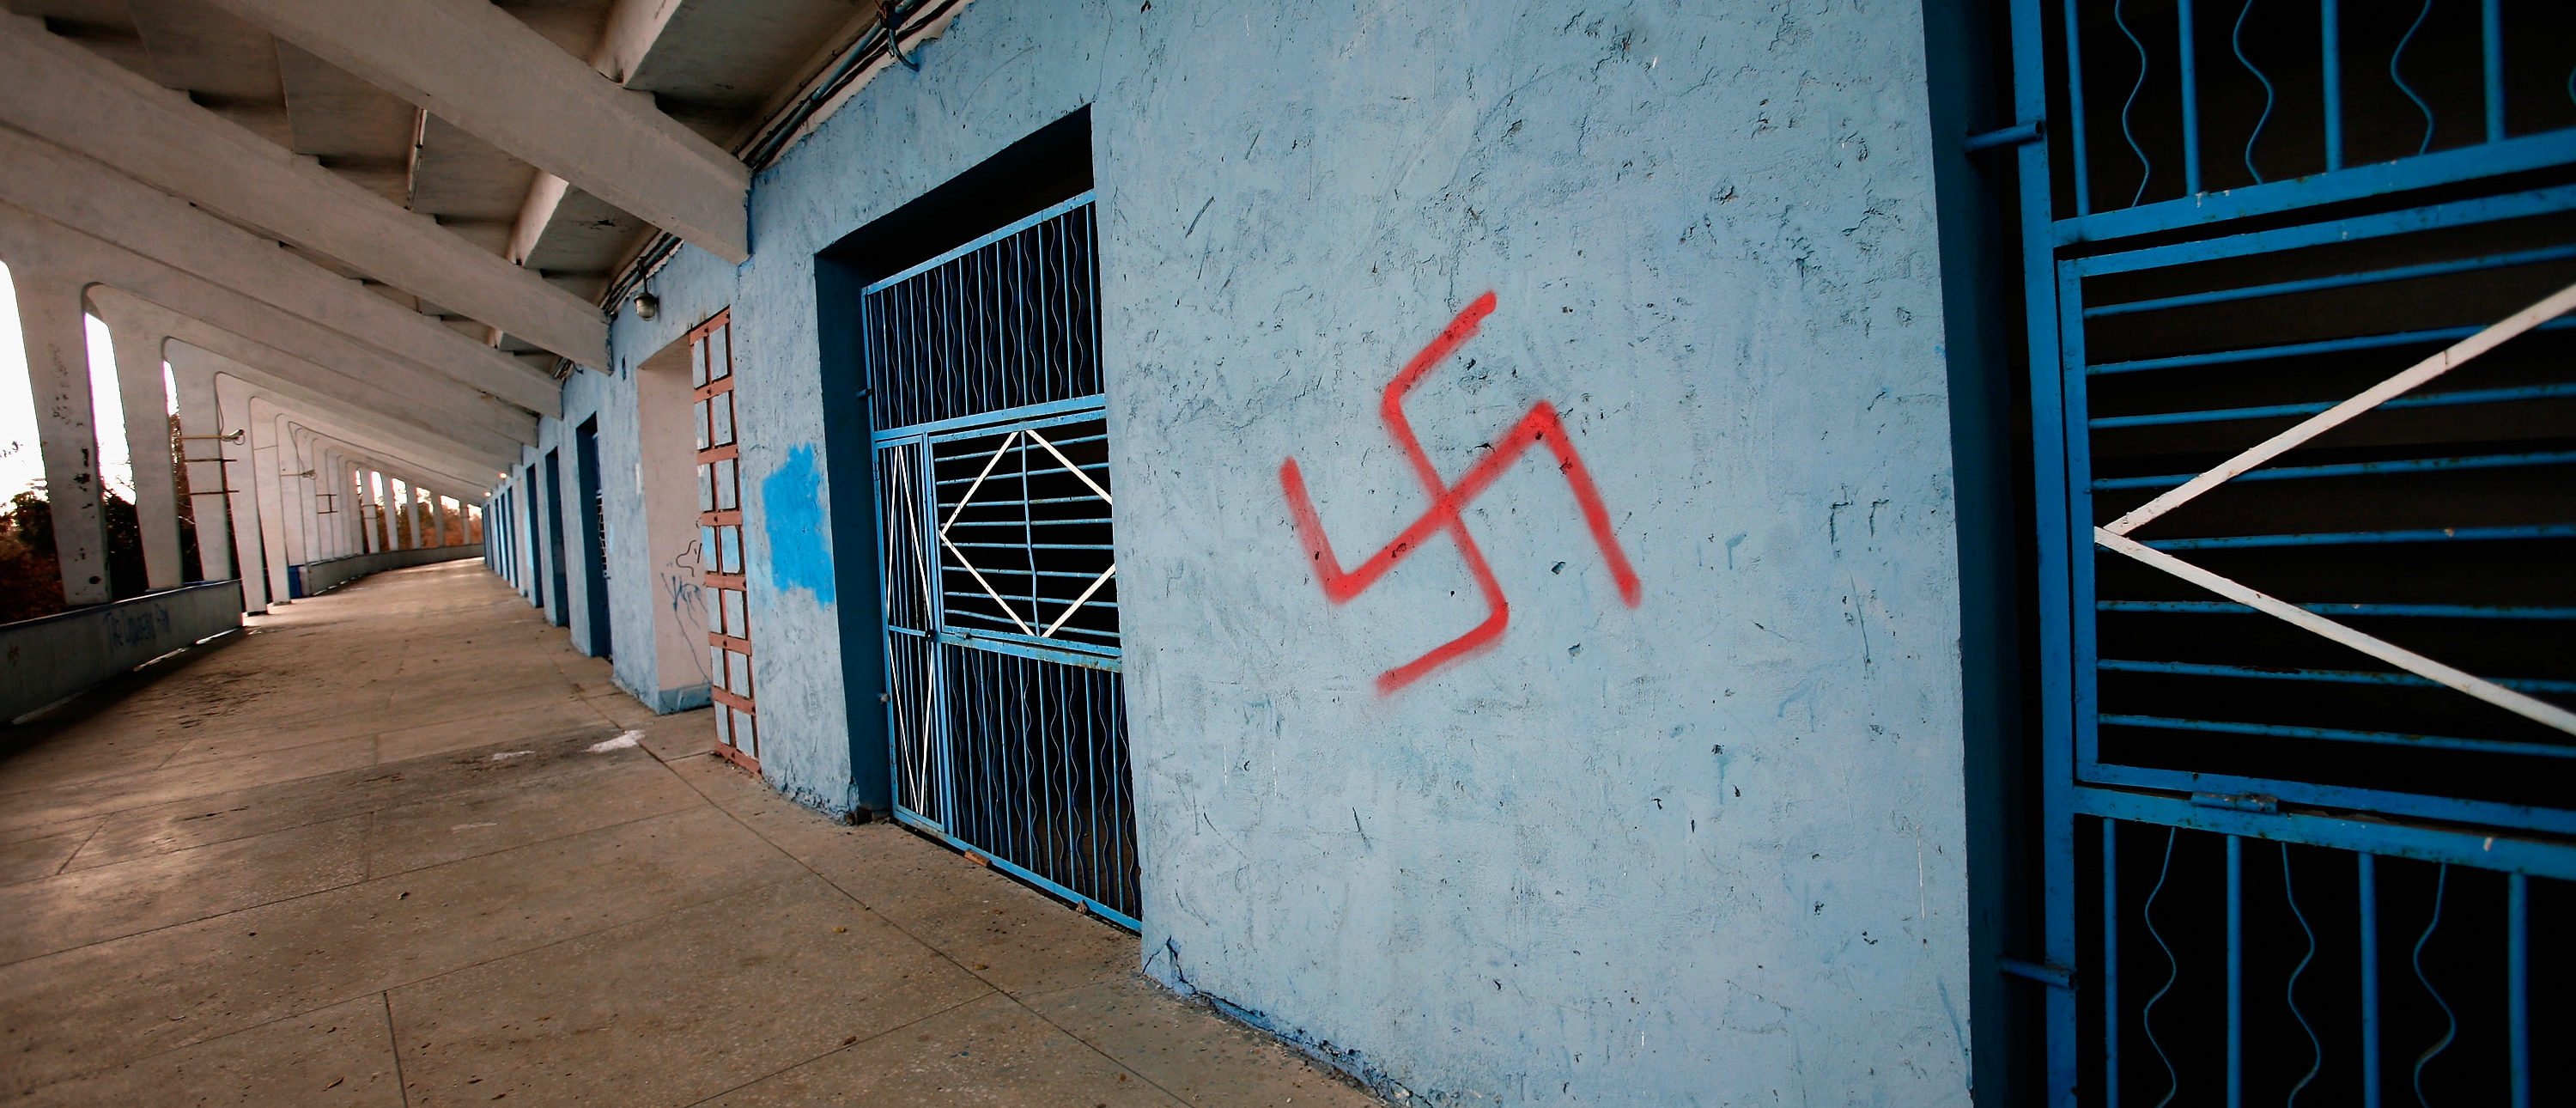 A swastika is seen graffitied on a wall in the Volgograd football stadium on November 16, 2011 in Volgograd, Russia. The stadium is due to be overhauled before the World Cup but work has yet to begin. Volgograd is one of thirteen proposed host cities as Russia prepares to host the 2018 FIFA World Cup. (Photo by Harry Engels/Getty Images)